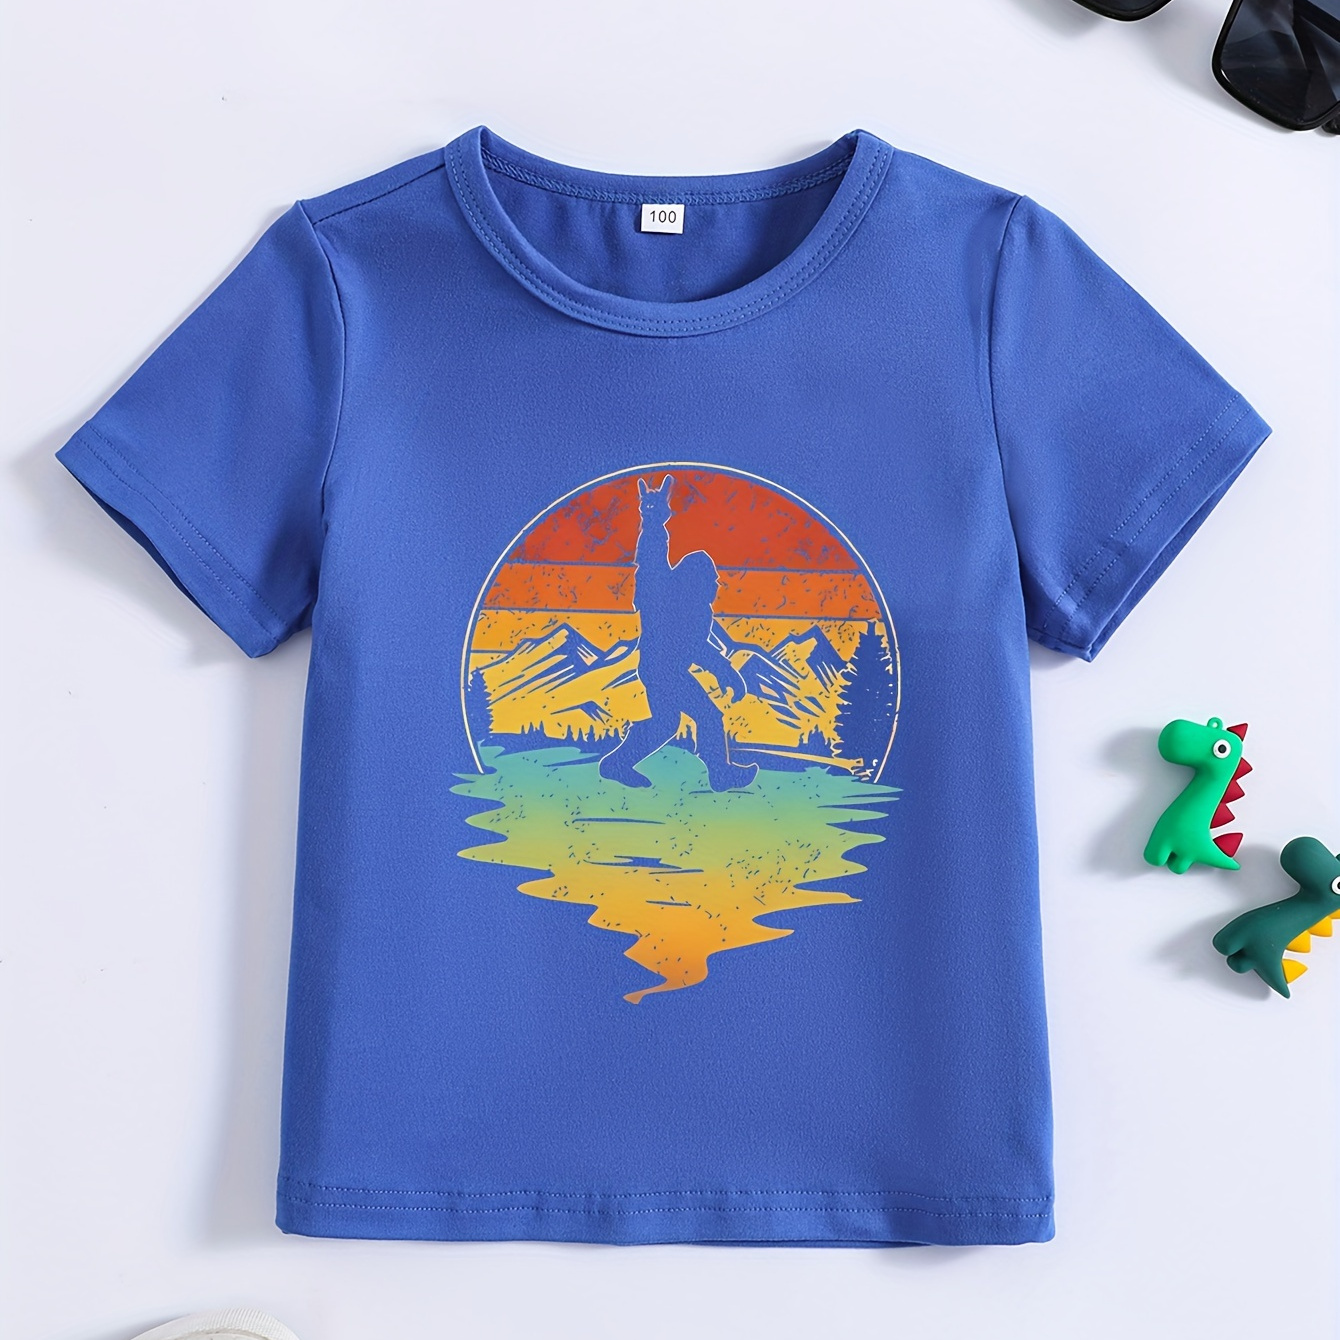 

Cave Ape Man Graphic Print Boy's Crew Neck Short Sleeve T-shirt, Suitable For Summer Daily Wear